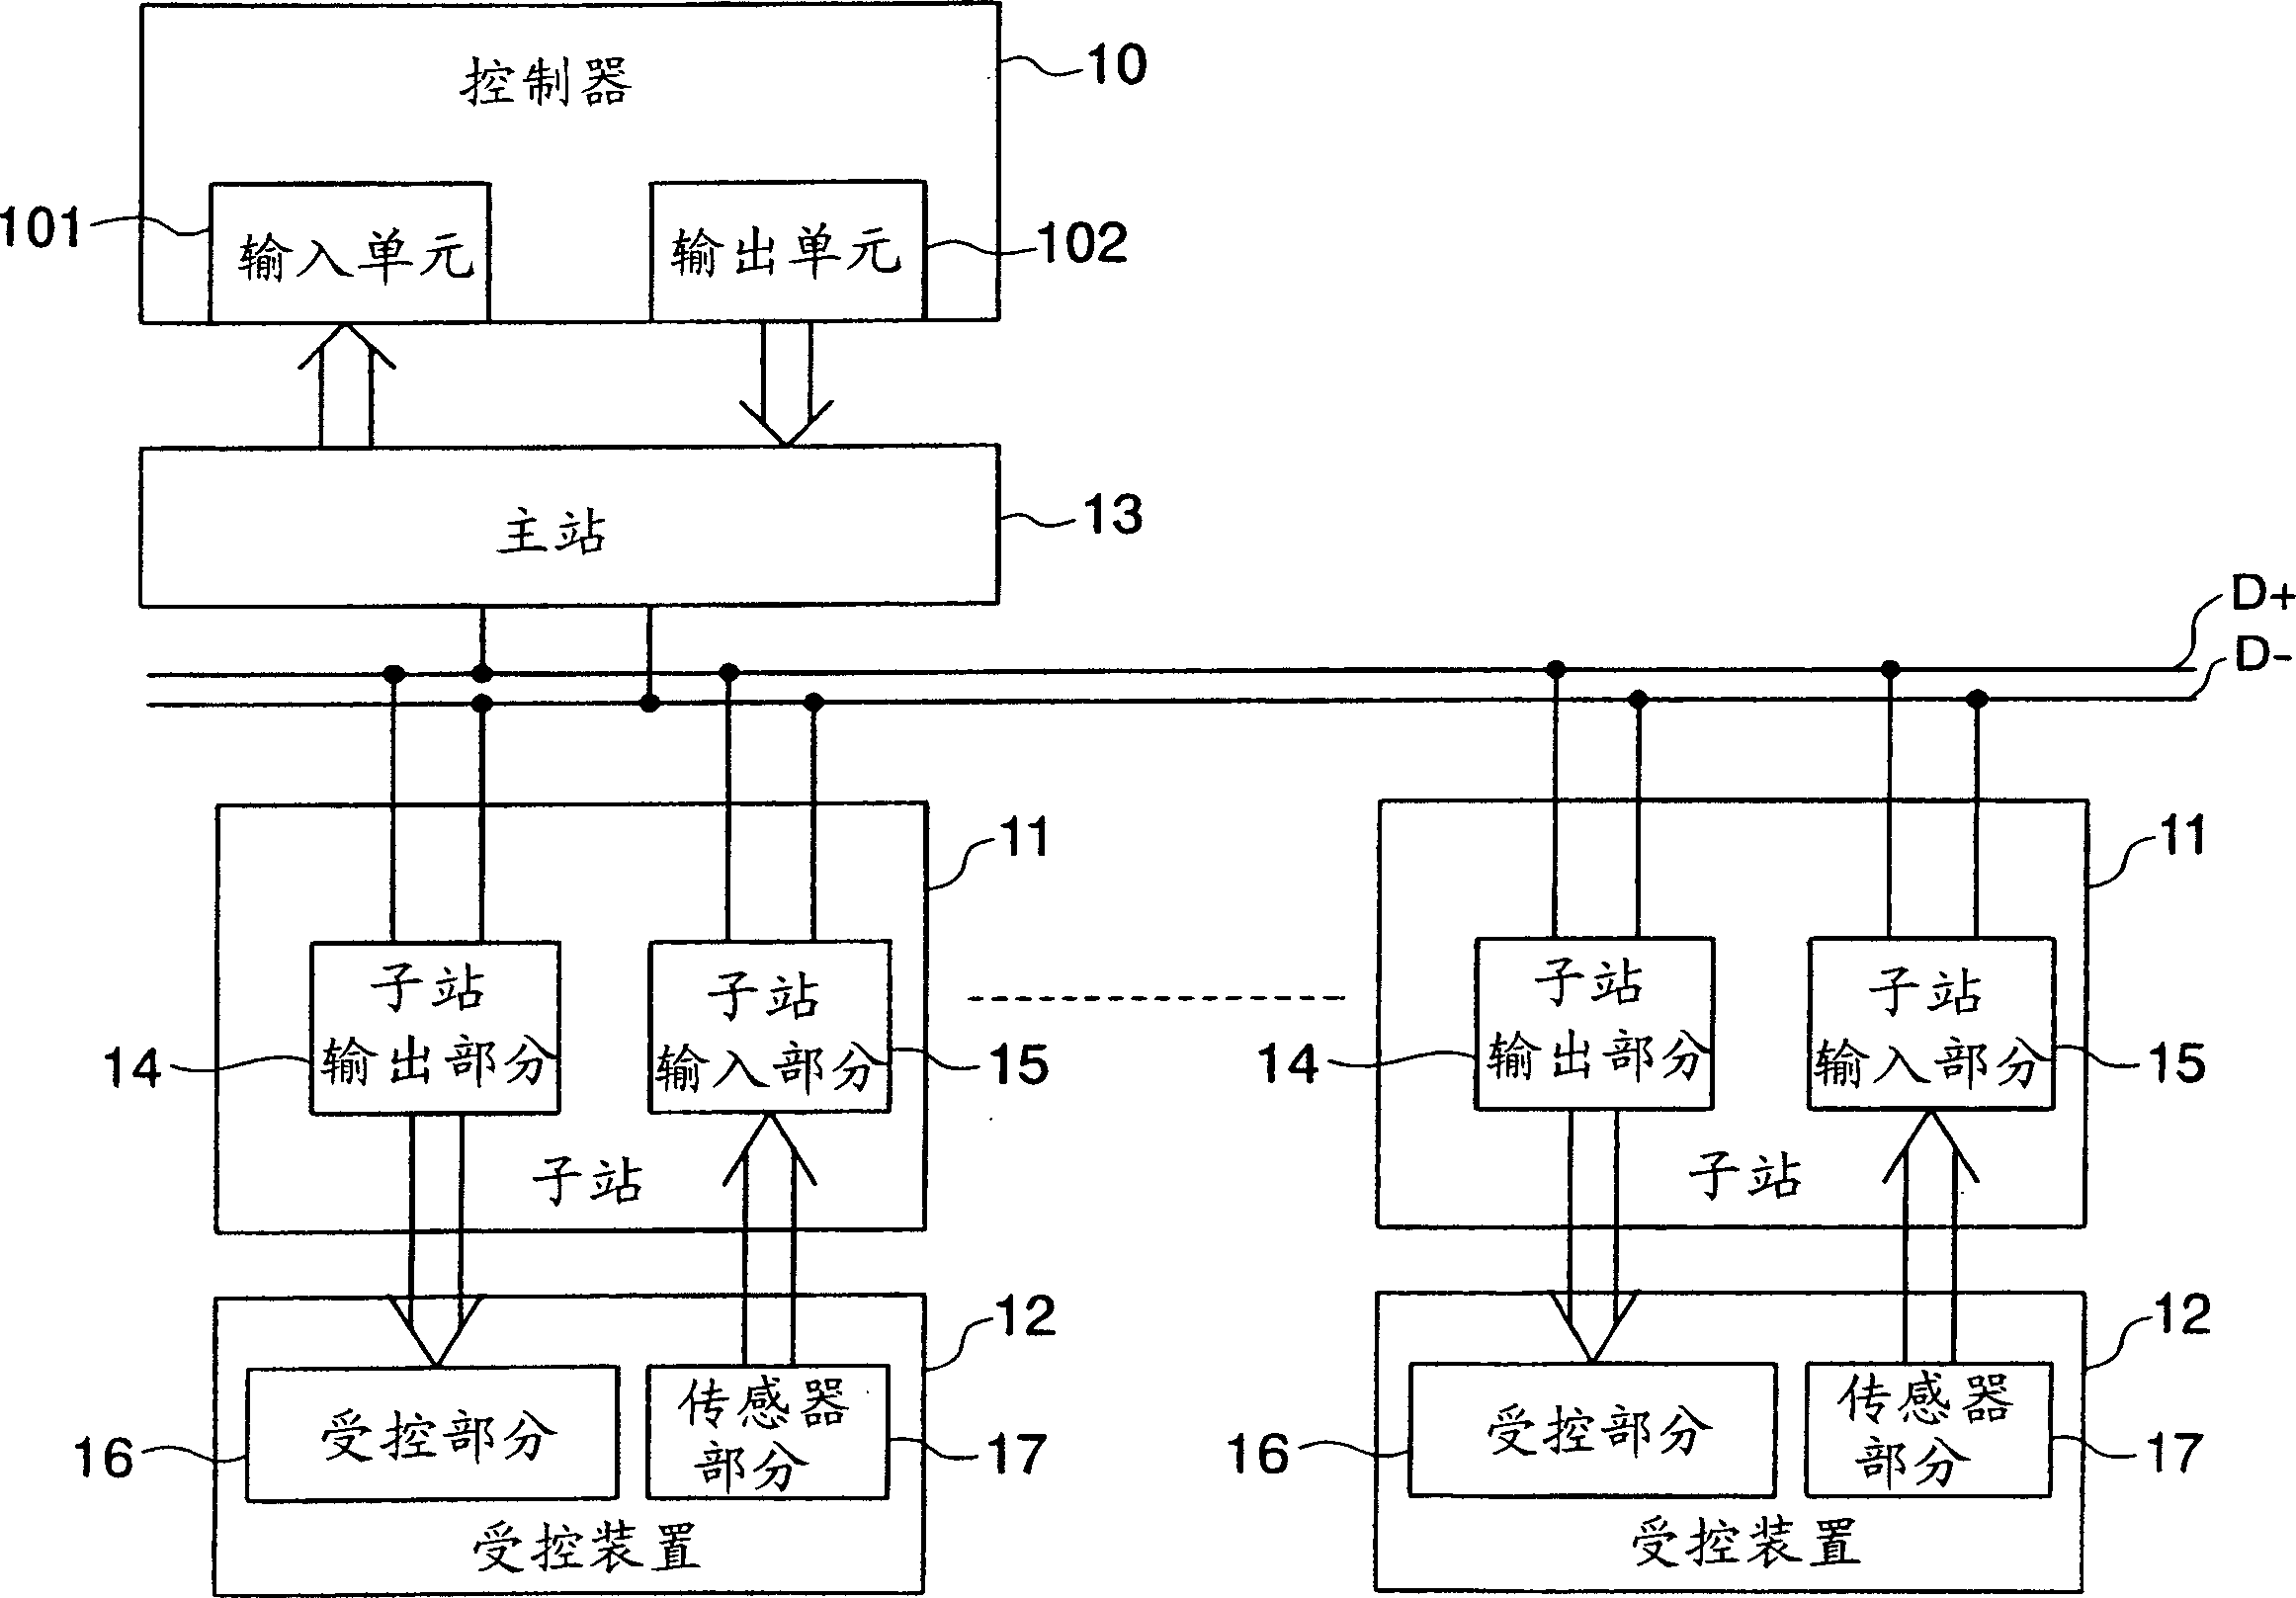 Control and monitoring signal transmission system